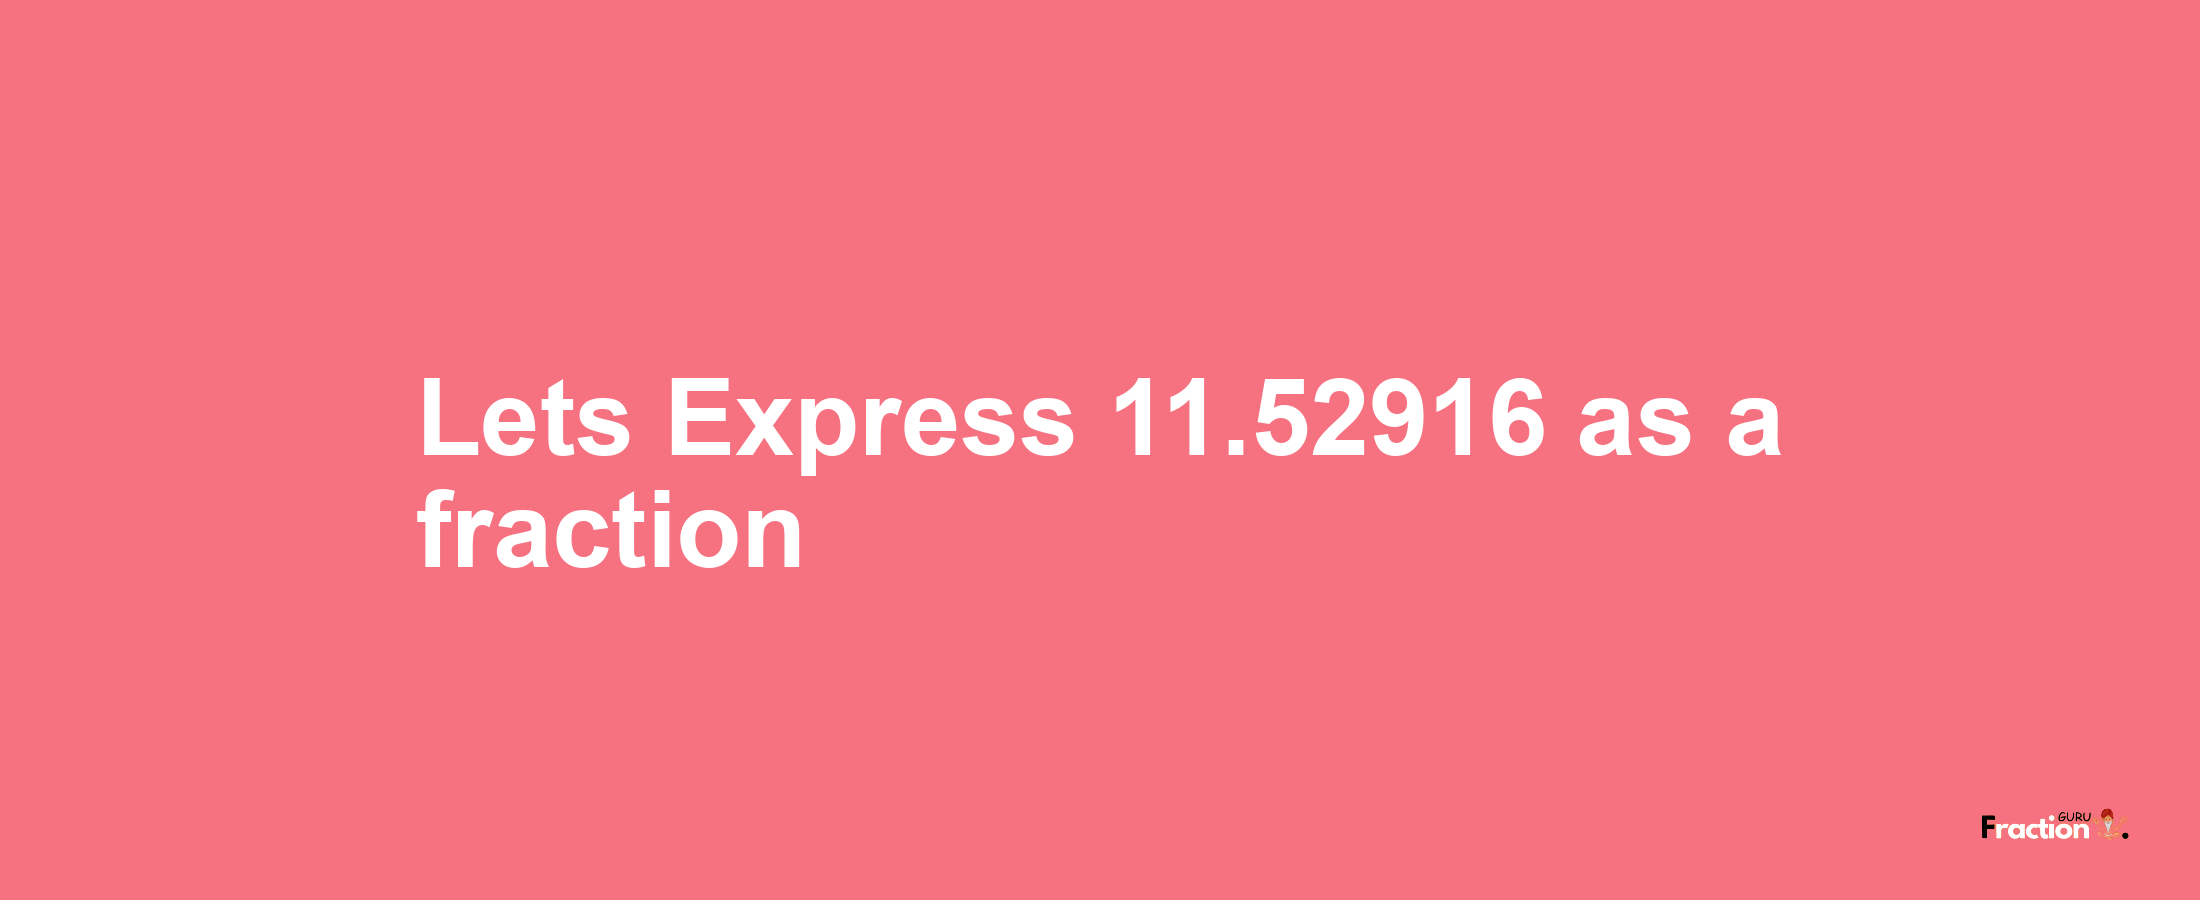 Lets Express 11.52916 as afraction